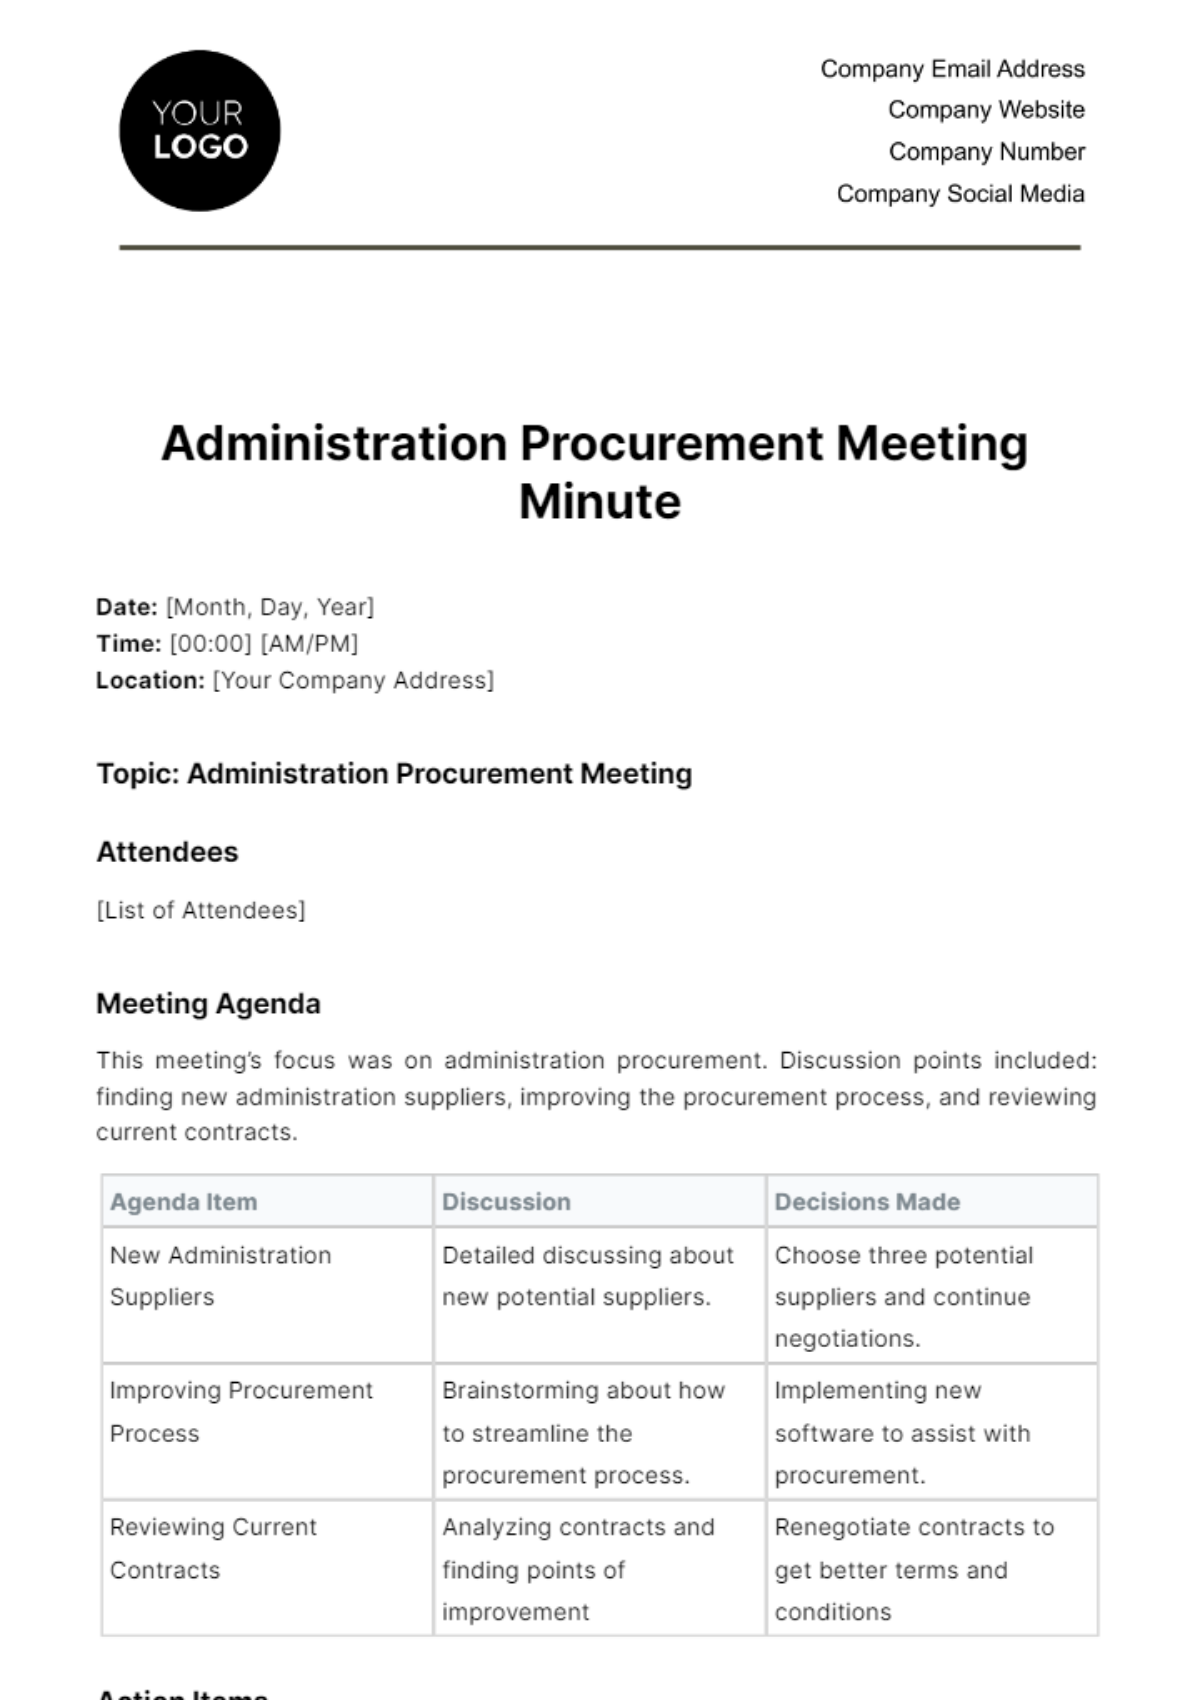 Administration Procurement Meeting Minute Template